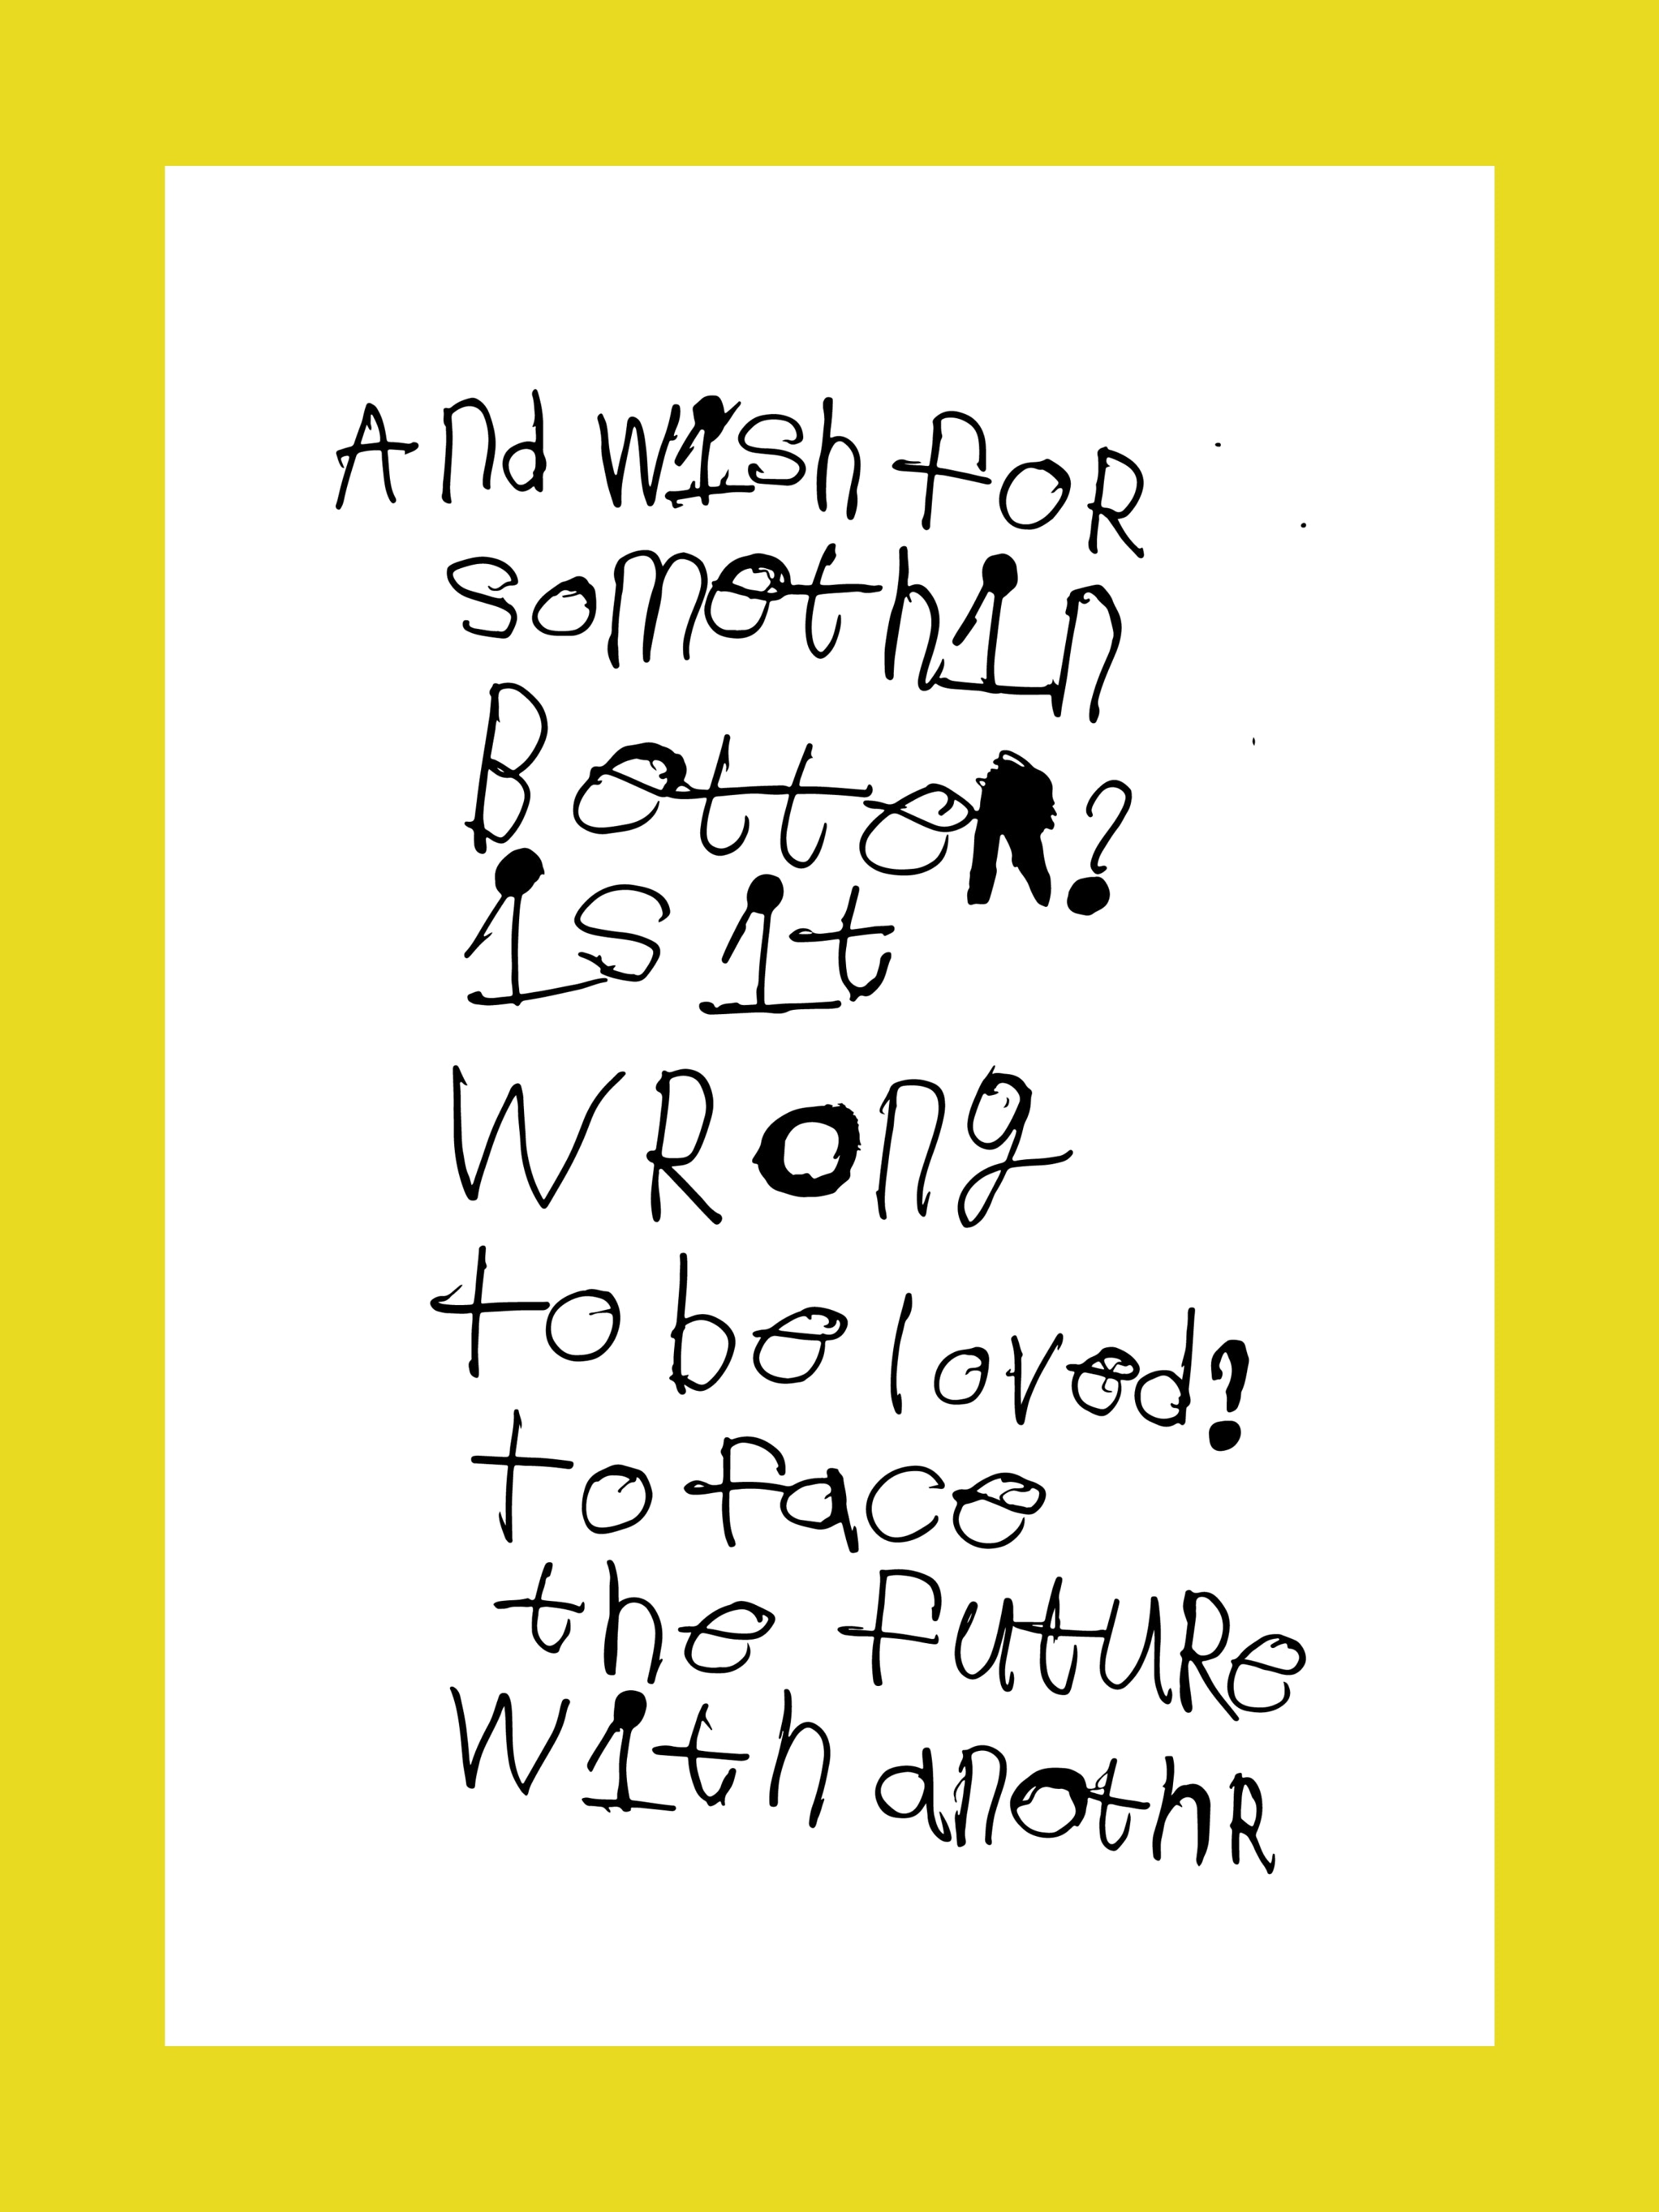 PRINT - AND WISH FOR SOMETHIN BETTER  by NOTES BY PIPER